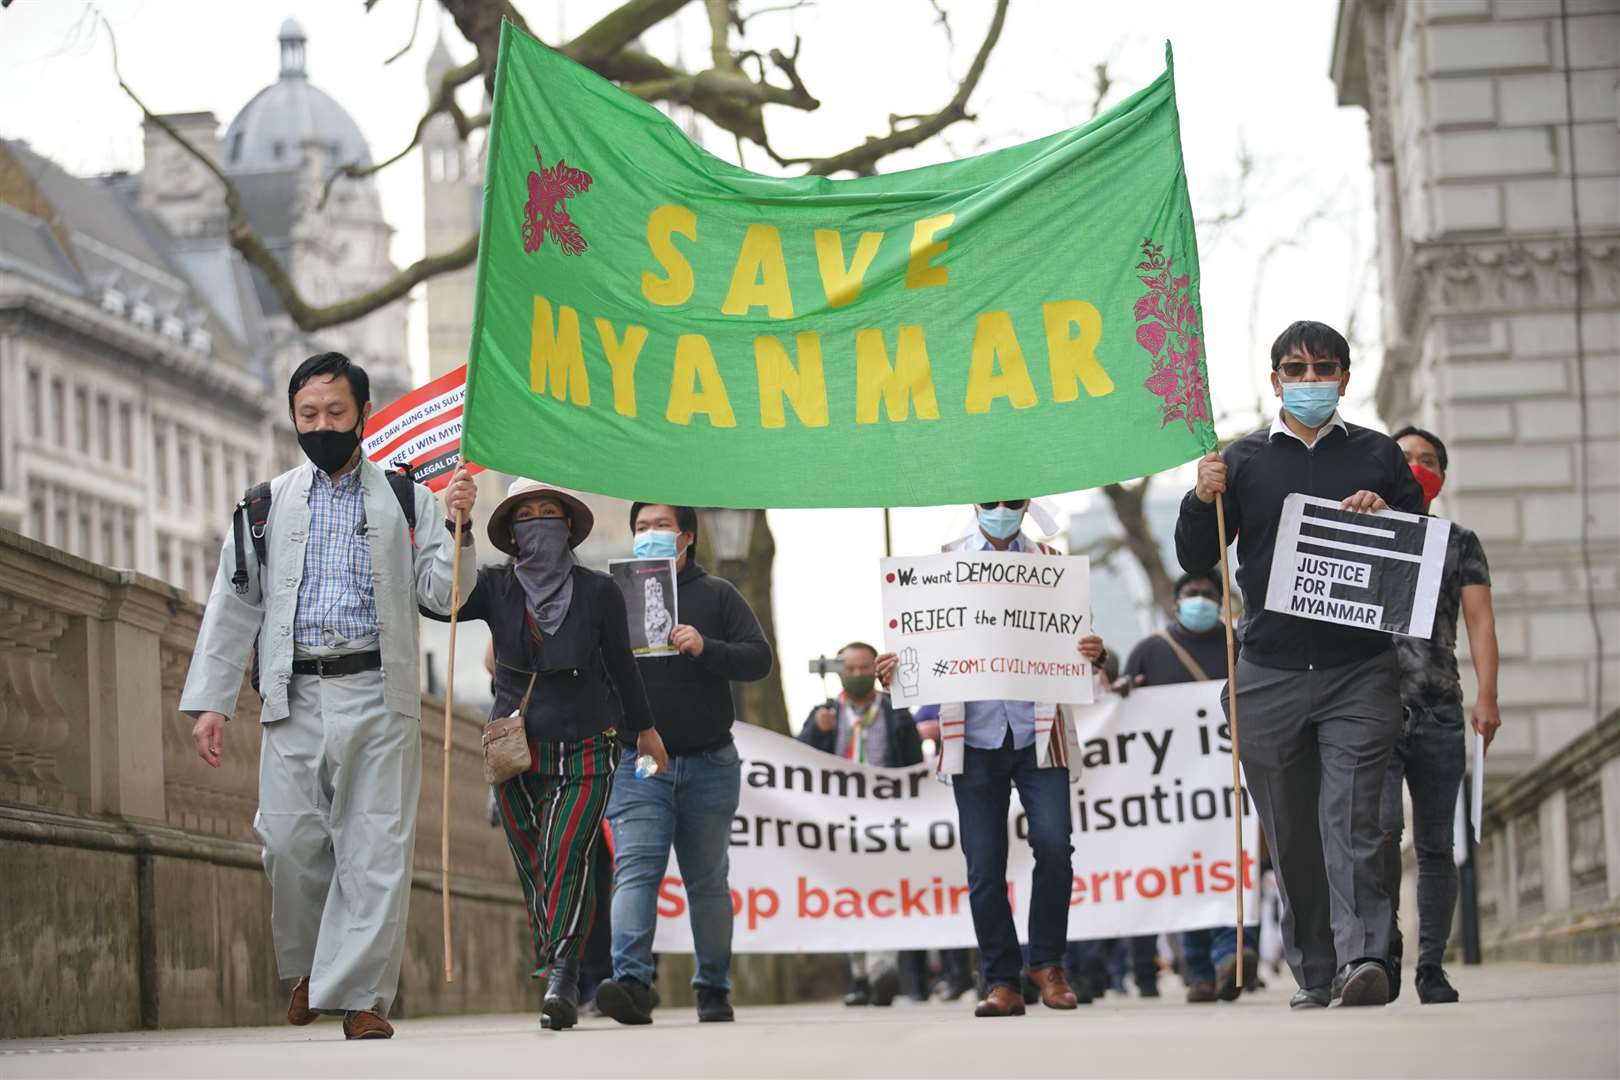 Myanmar, which has sent police to receive training in the UK, has been accused of human rights abuses by protesters across the world (Aaron Chown/PA)